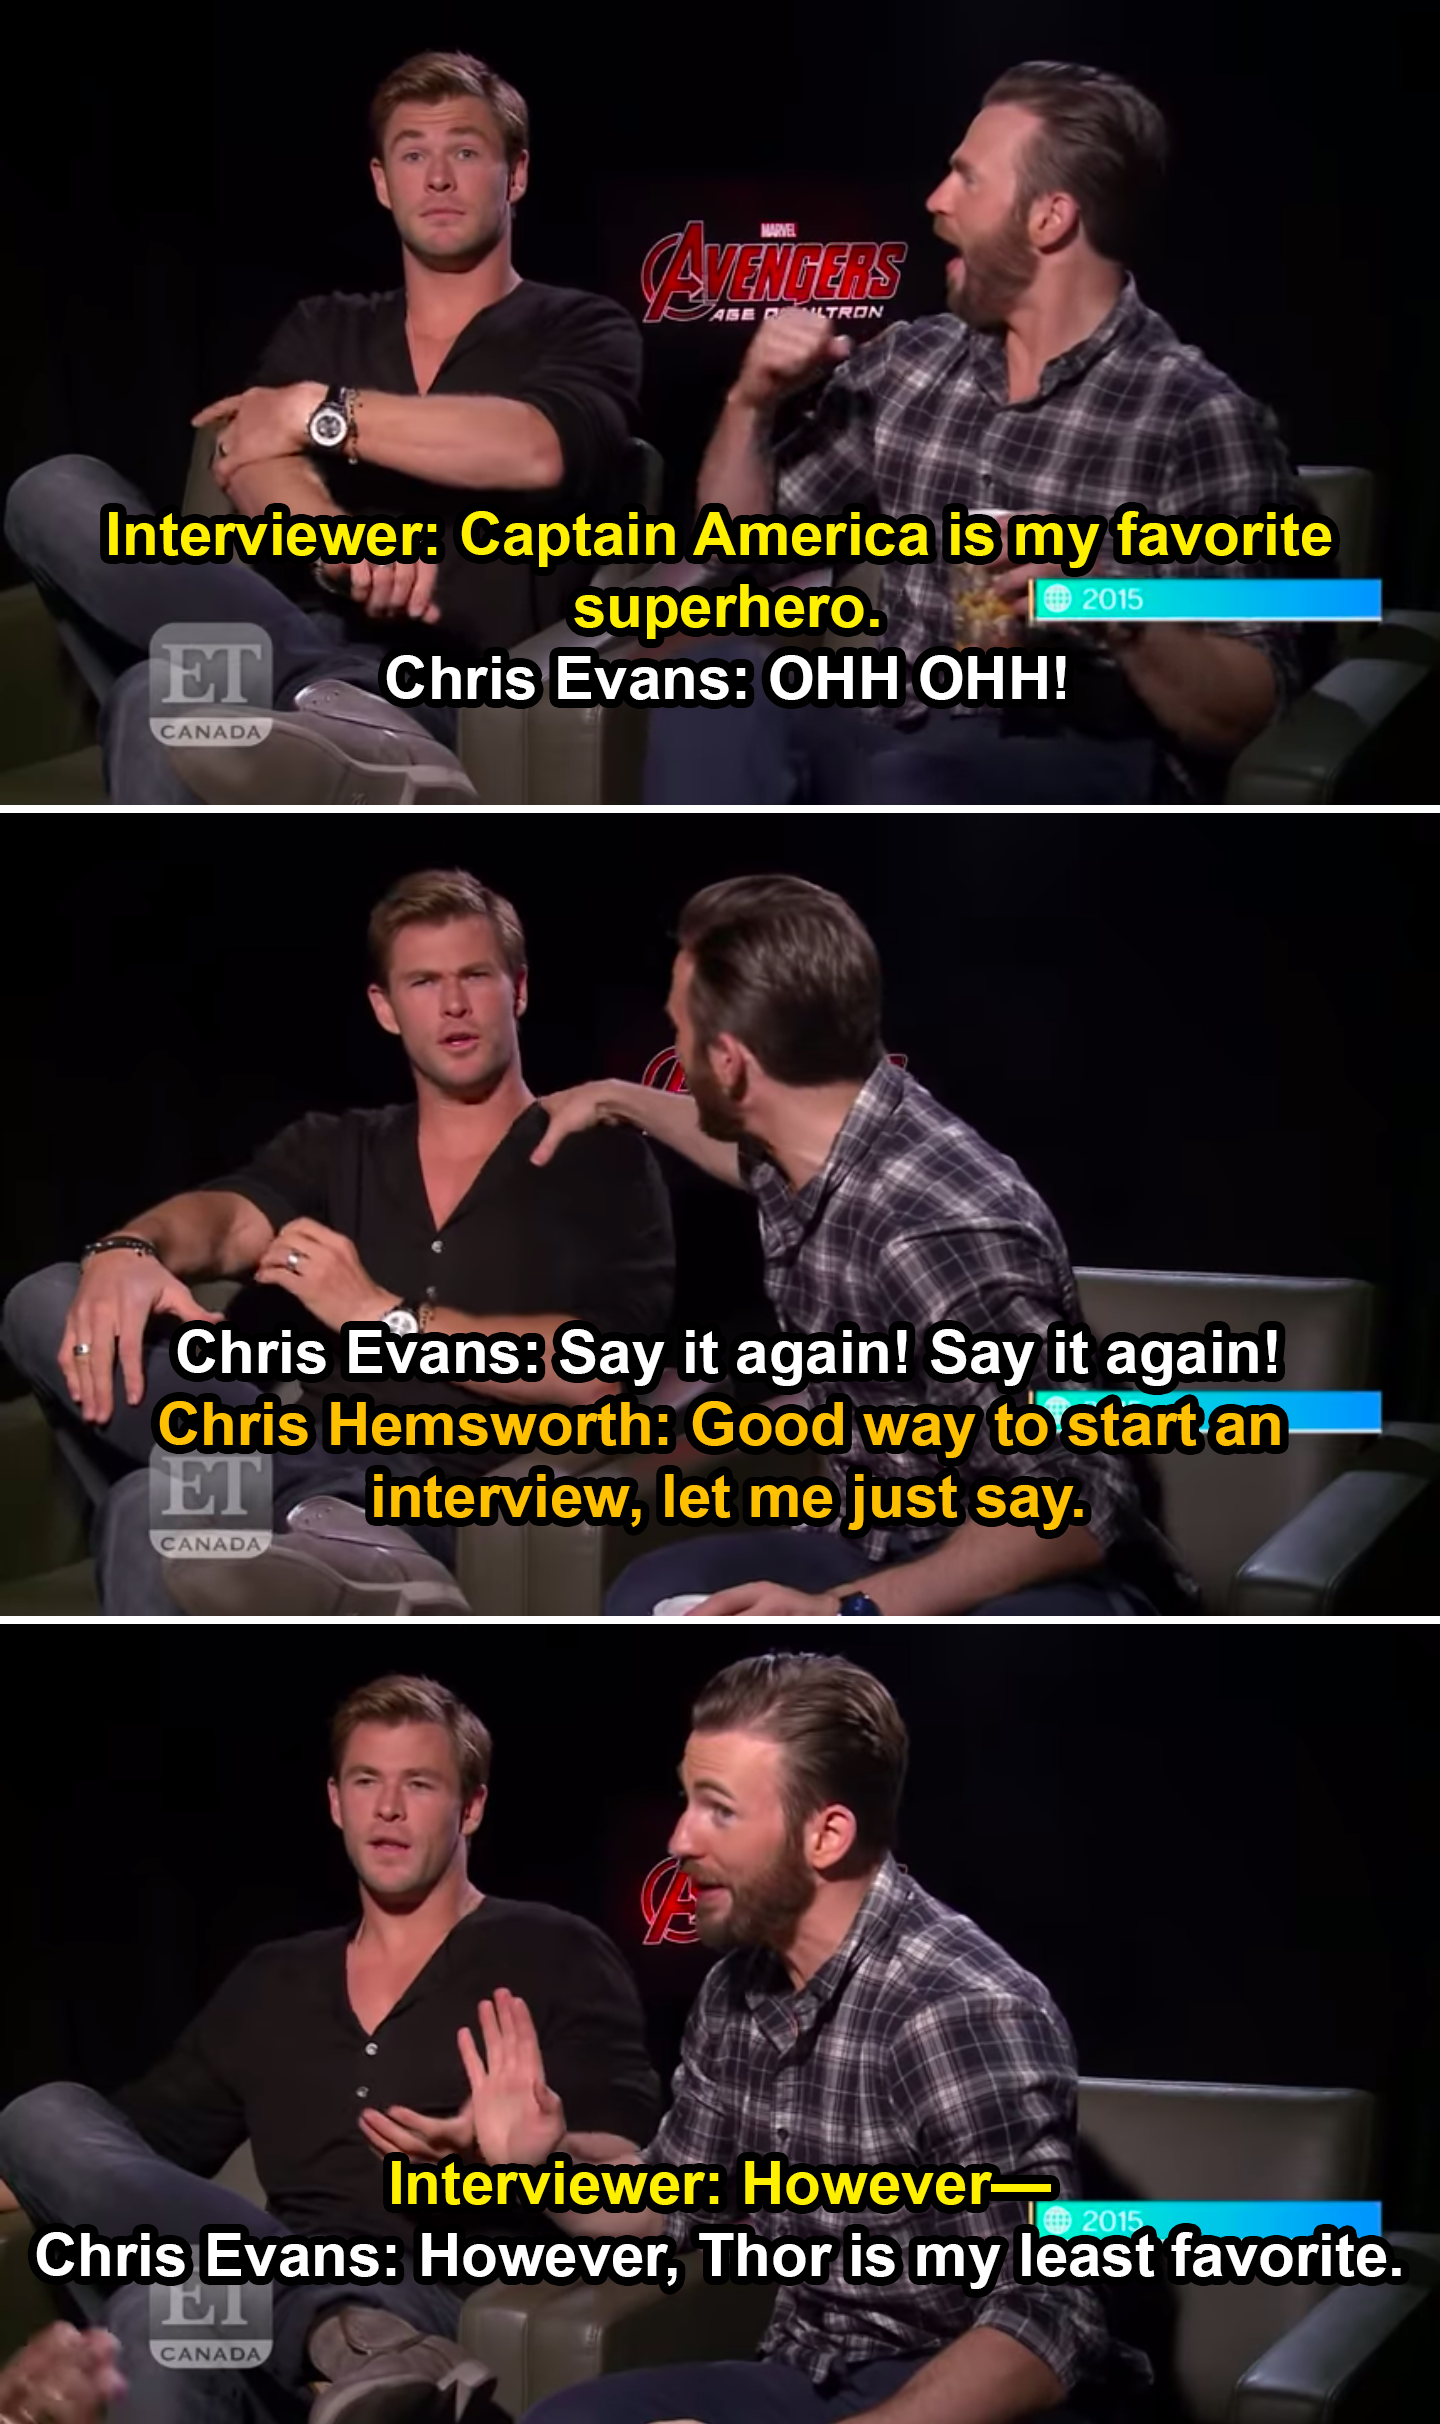 Chris Evans cheering at Chris Hemsworth when the interviewer says Captain America is their favorite superhero